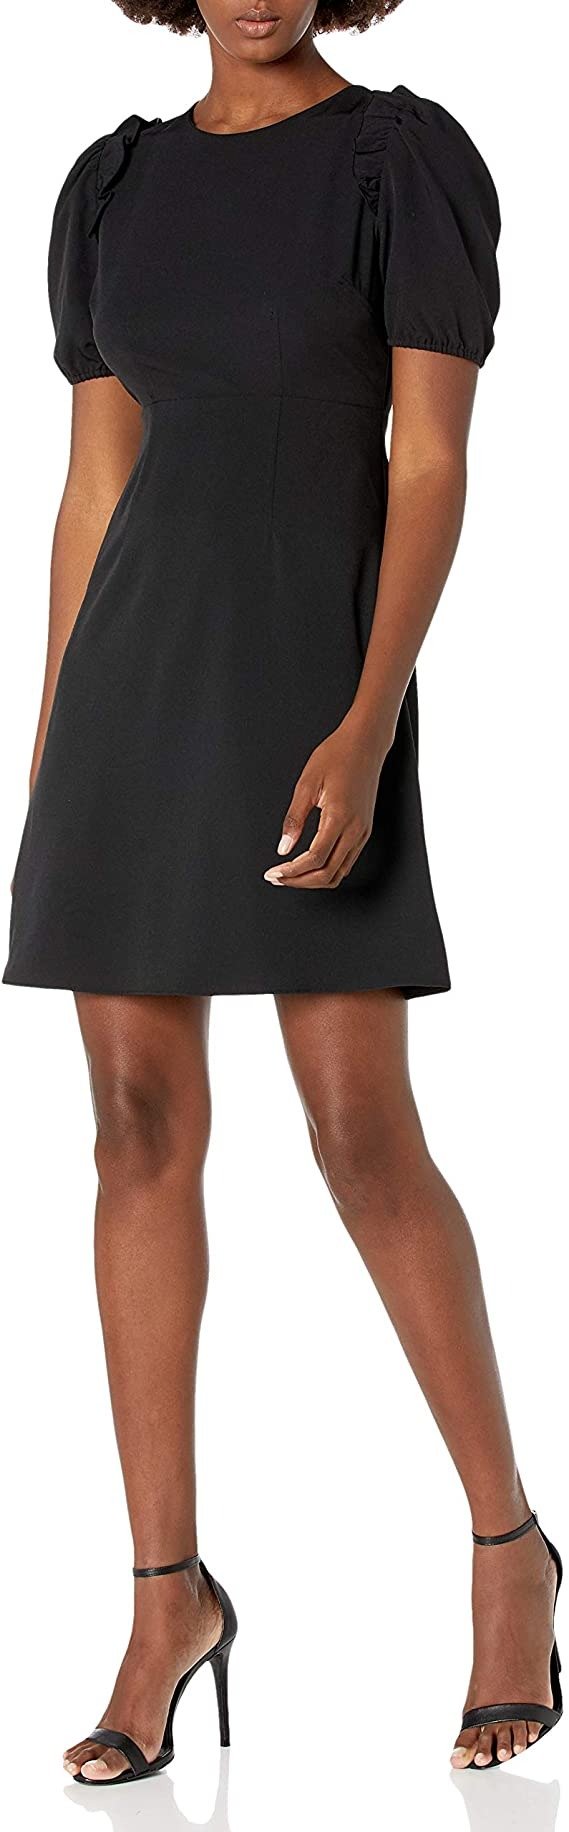 & Ro Women's Florence Puff Half Sleeve Empire Waist Fit and Flare Dress